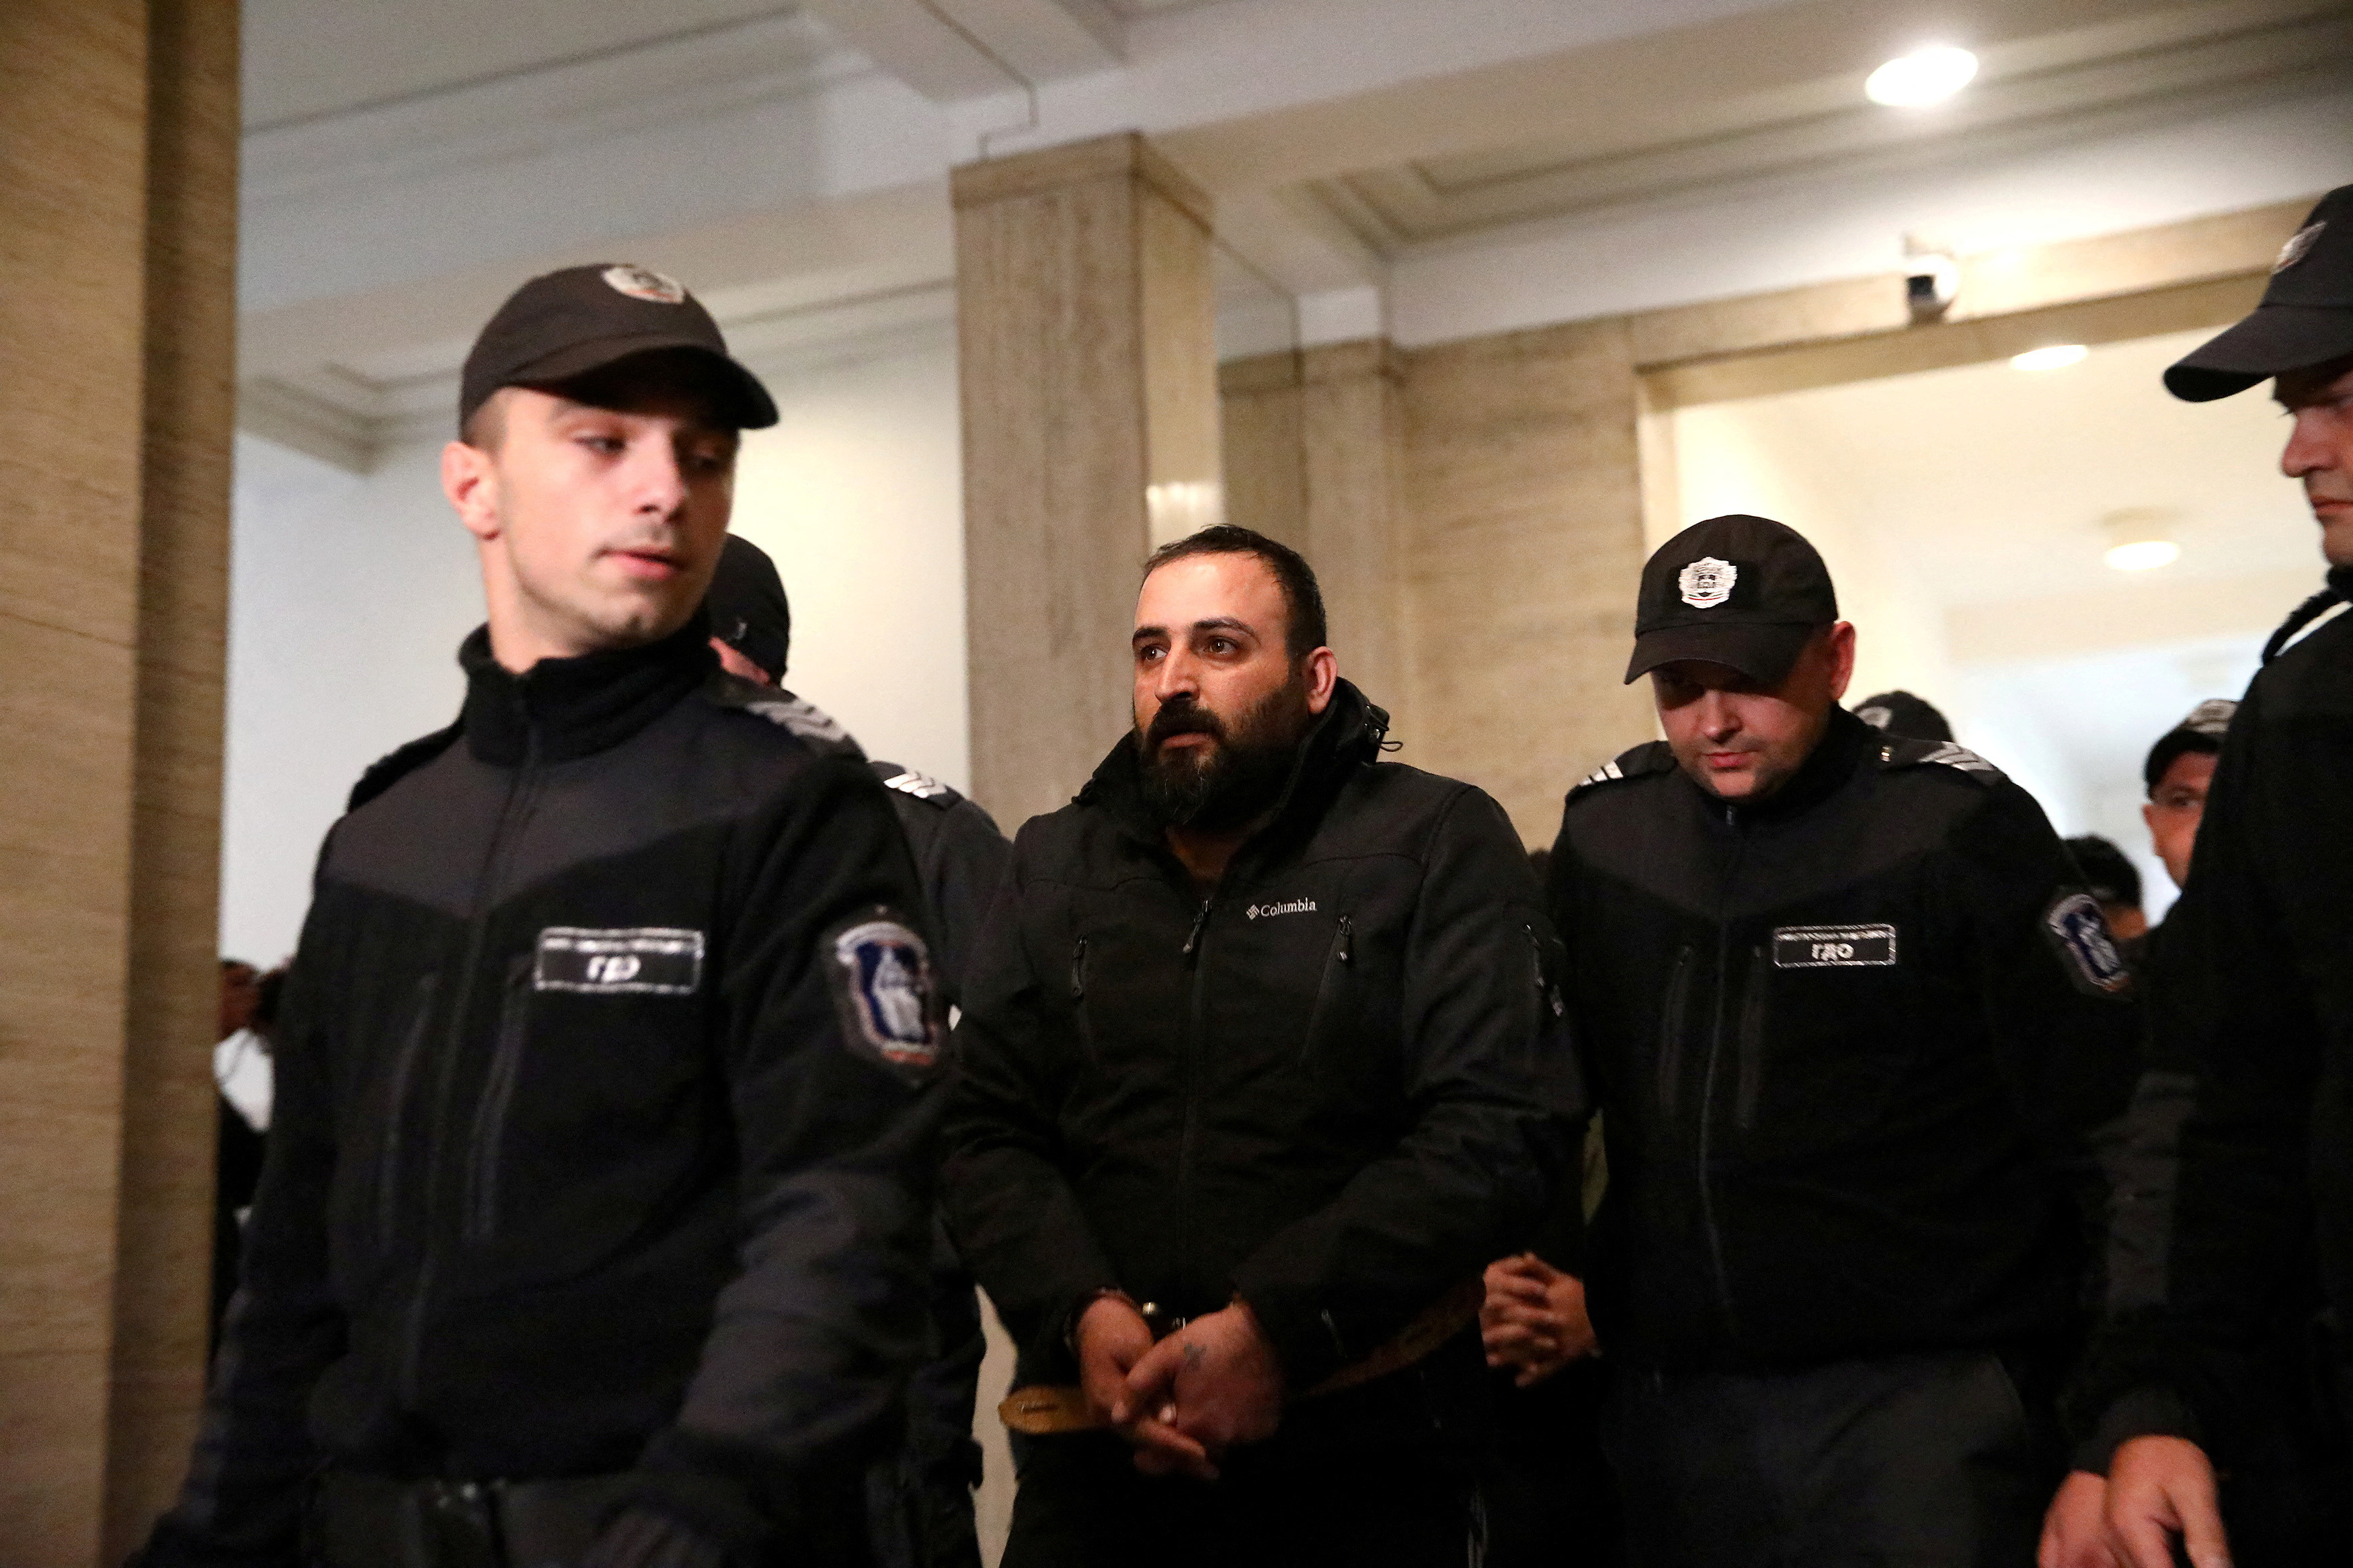 A man charged with allegedly supporting terrorist acts in connection with an explosion in Istanbul, is escorted to the courtroom, Sofia, Bulgaria on Saturday. Reuters/Stringer